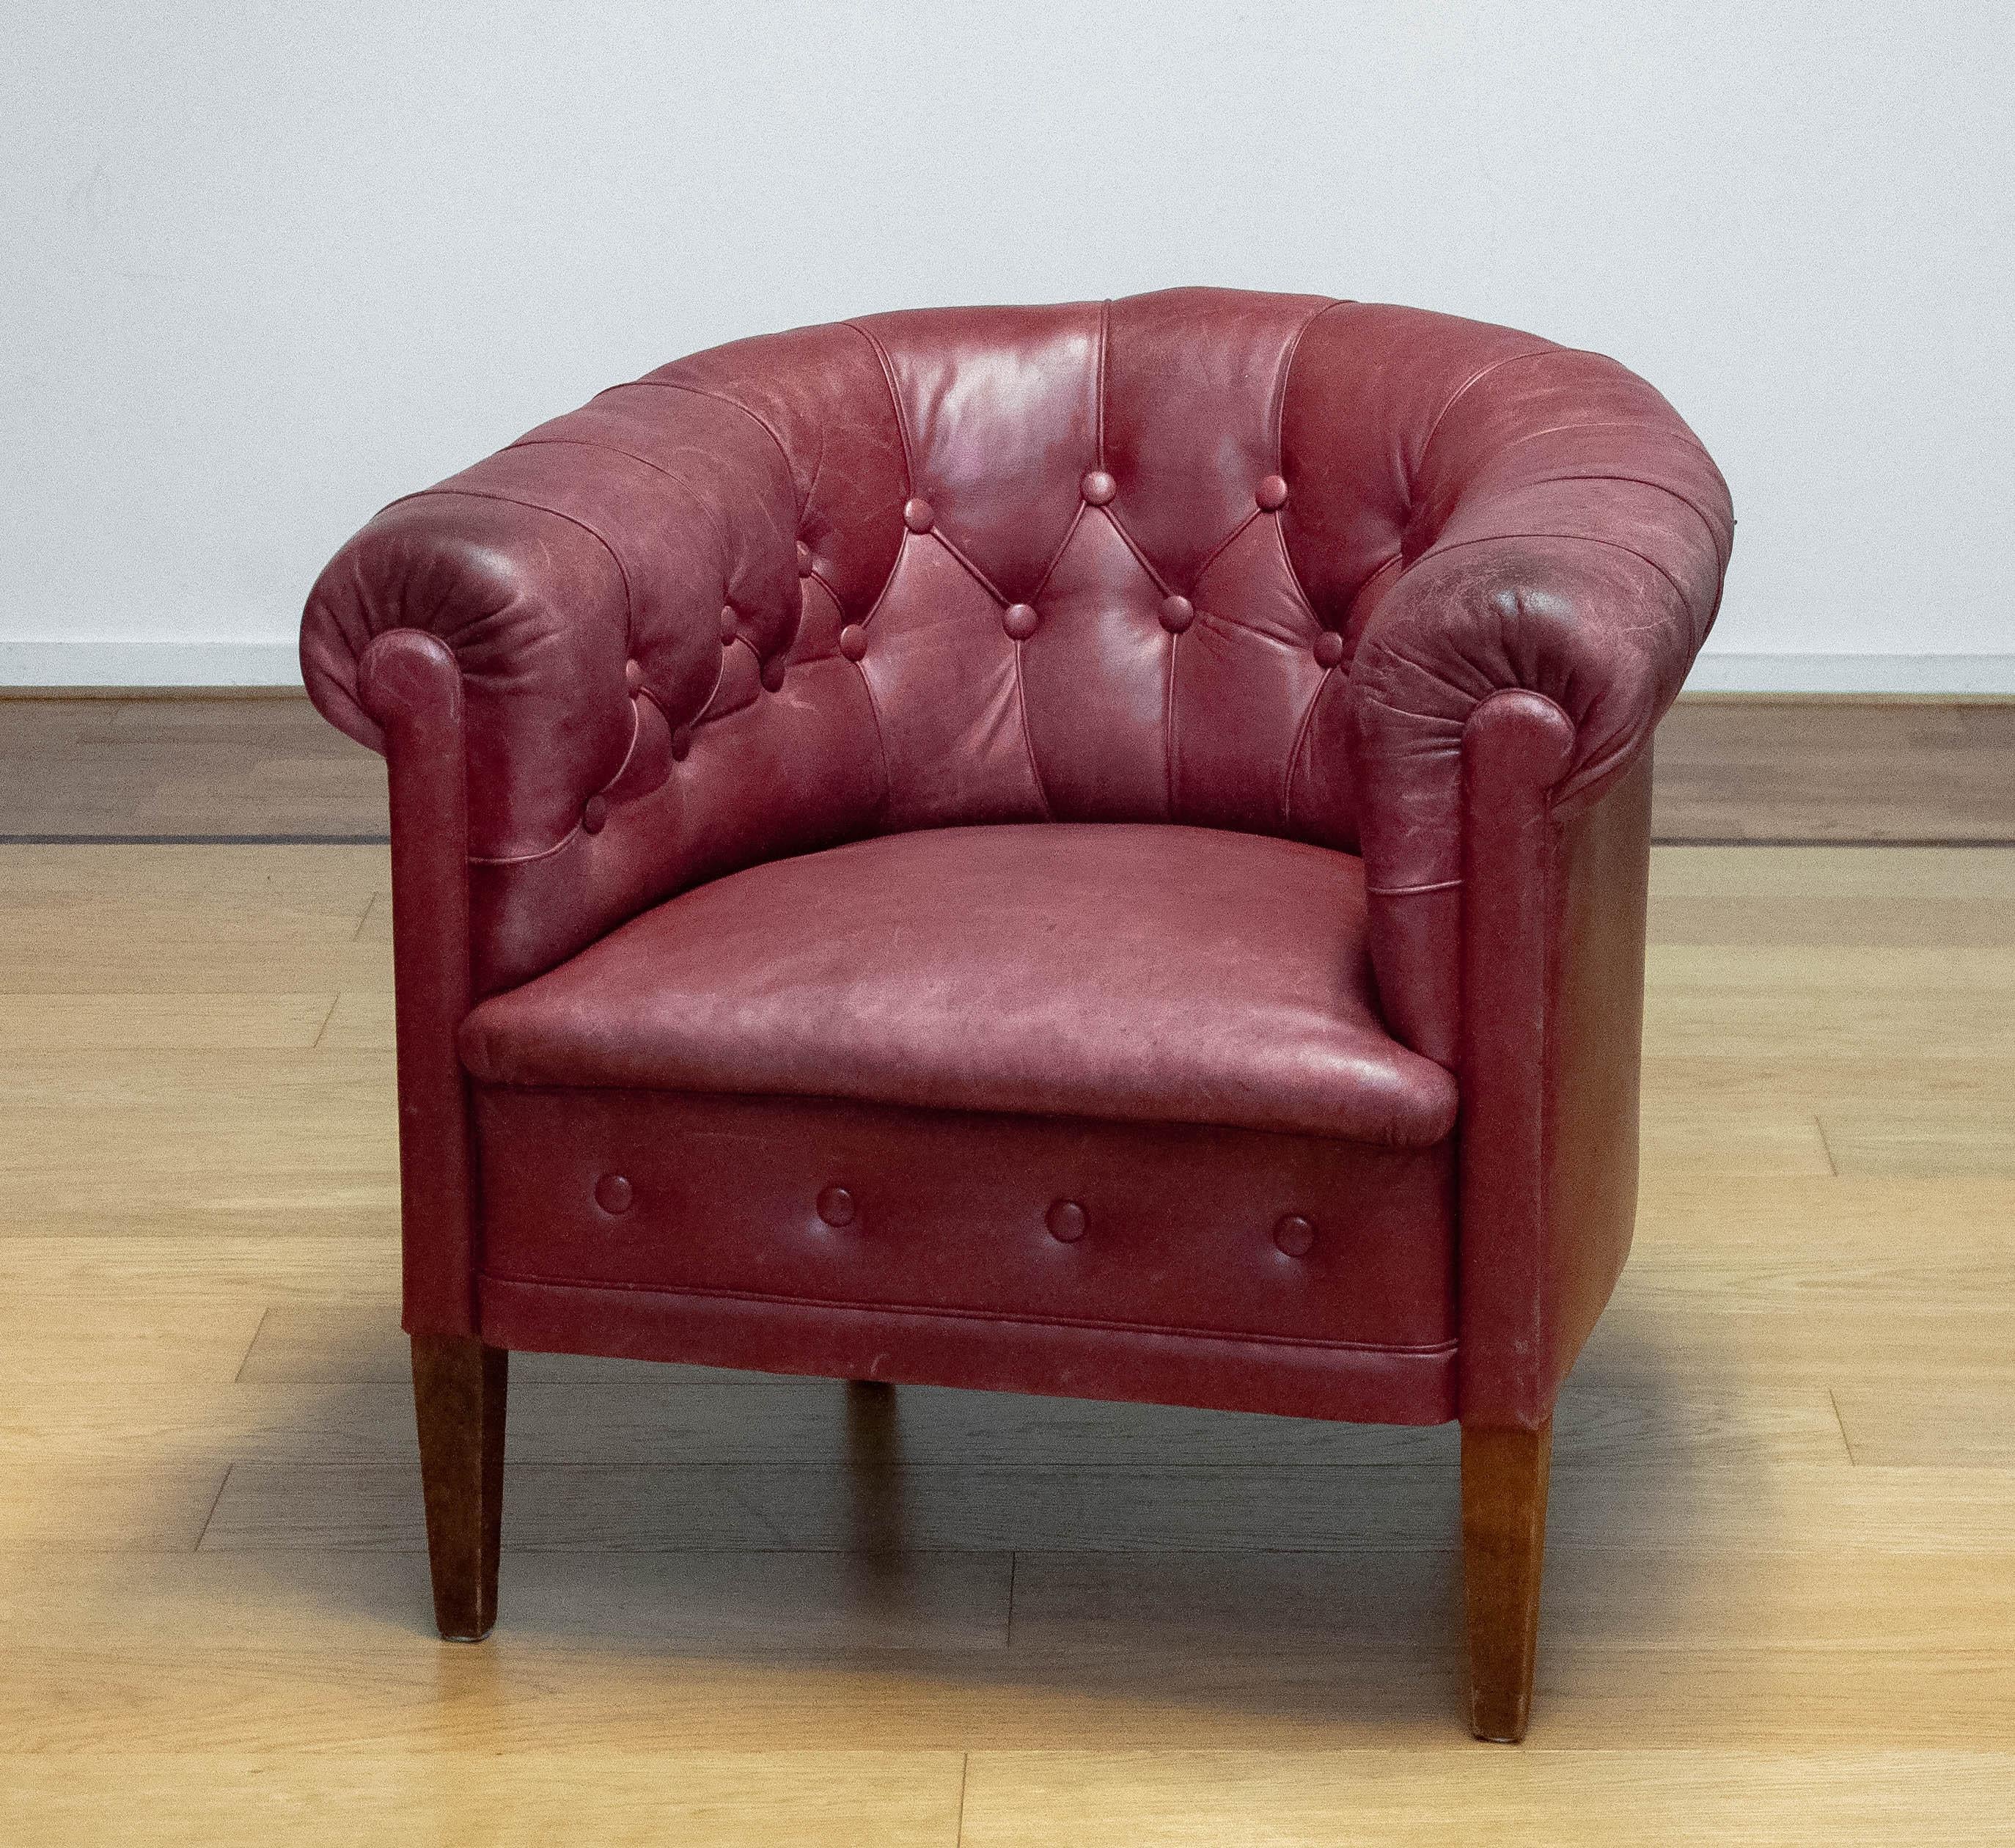 1930s Swedish Crimson Red Chesterfield Club / Lounge Chair in Patinated Leather For Sale 7